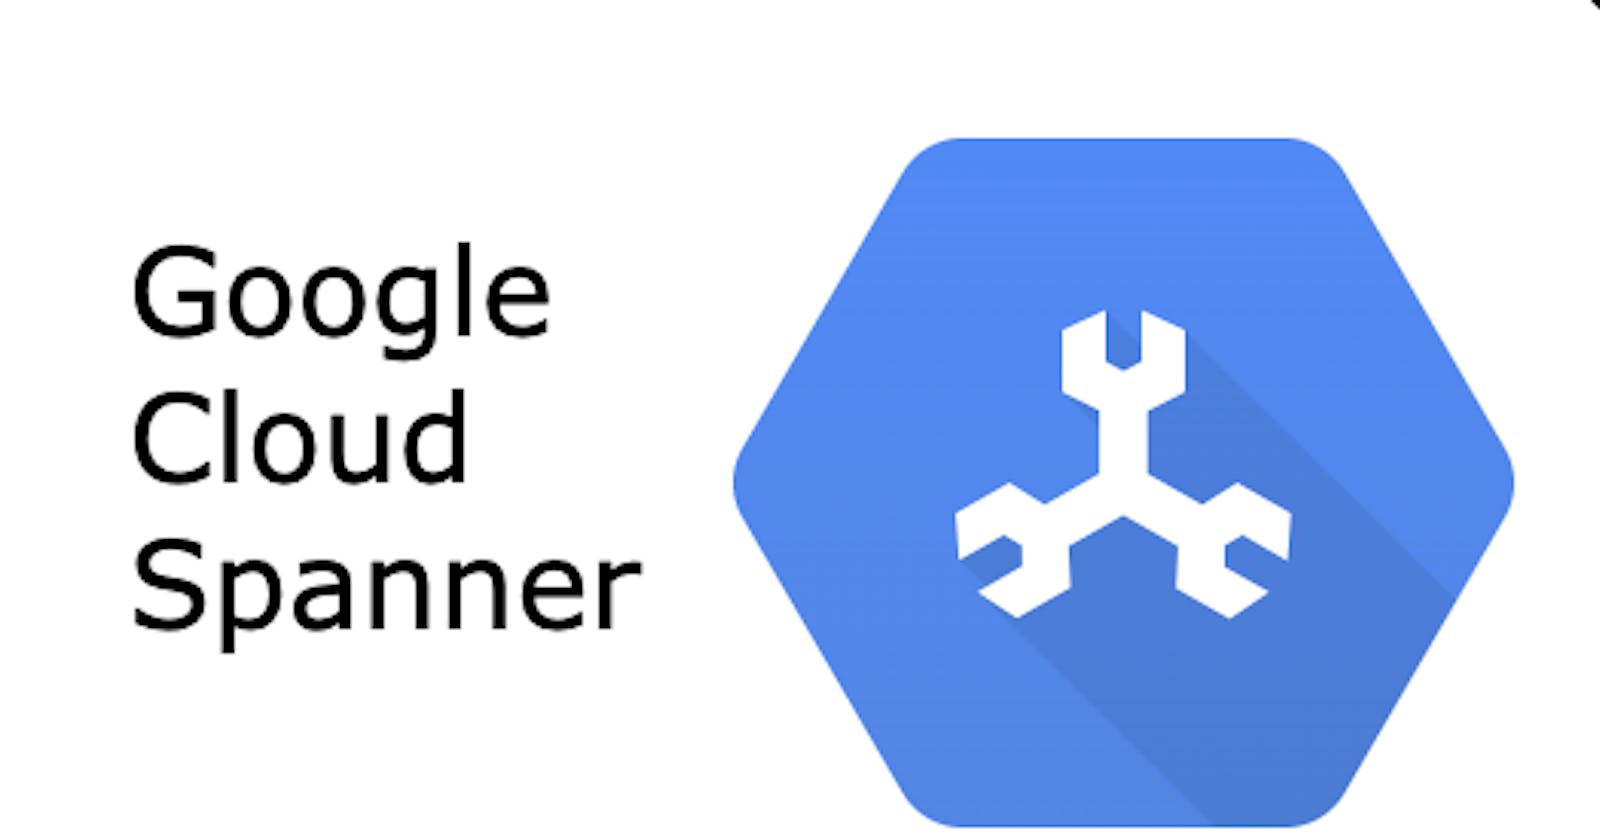 Spanner: Google’s Globally-Distributed Database